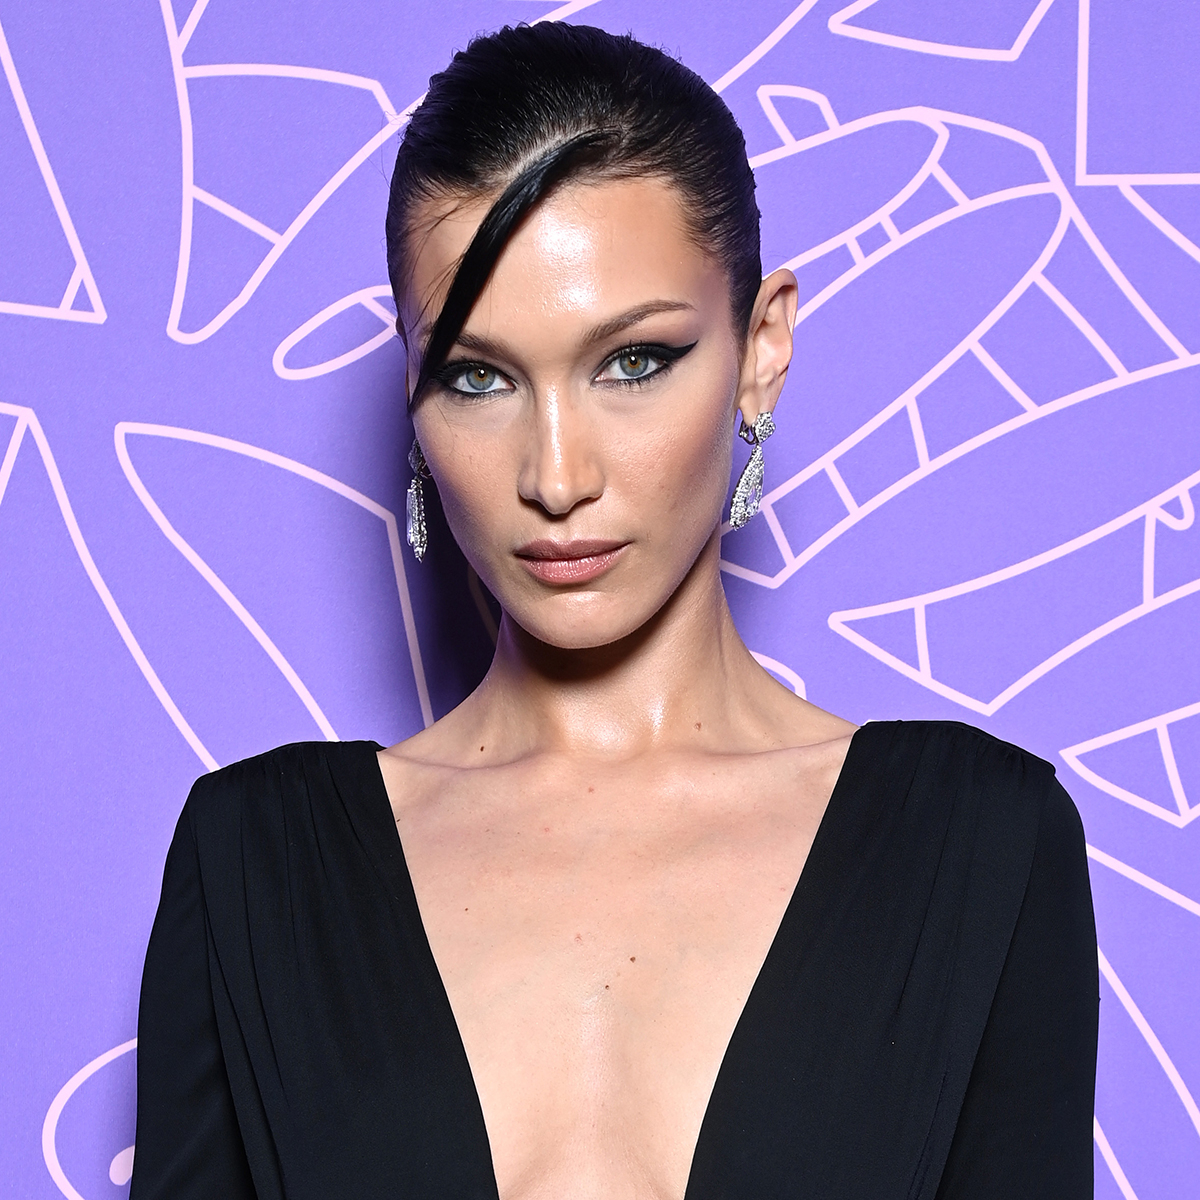 Bella Hadid Is 5 Months Alcohol-Free and Loving Life